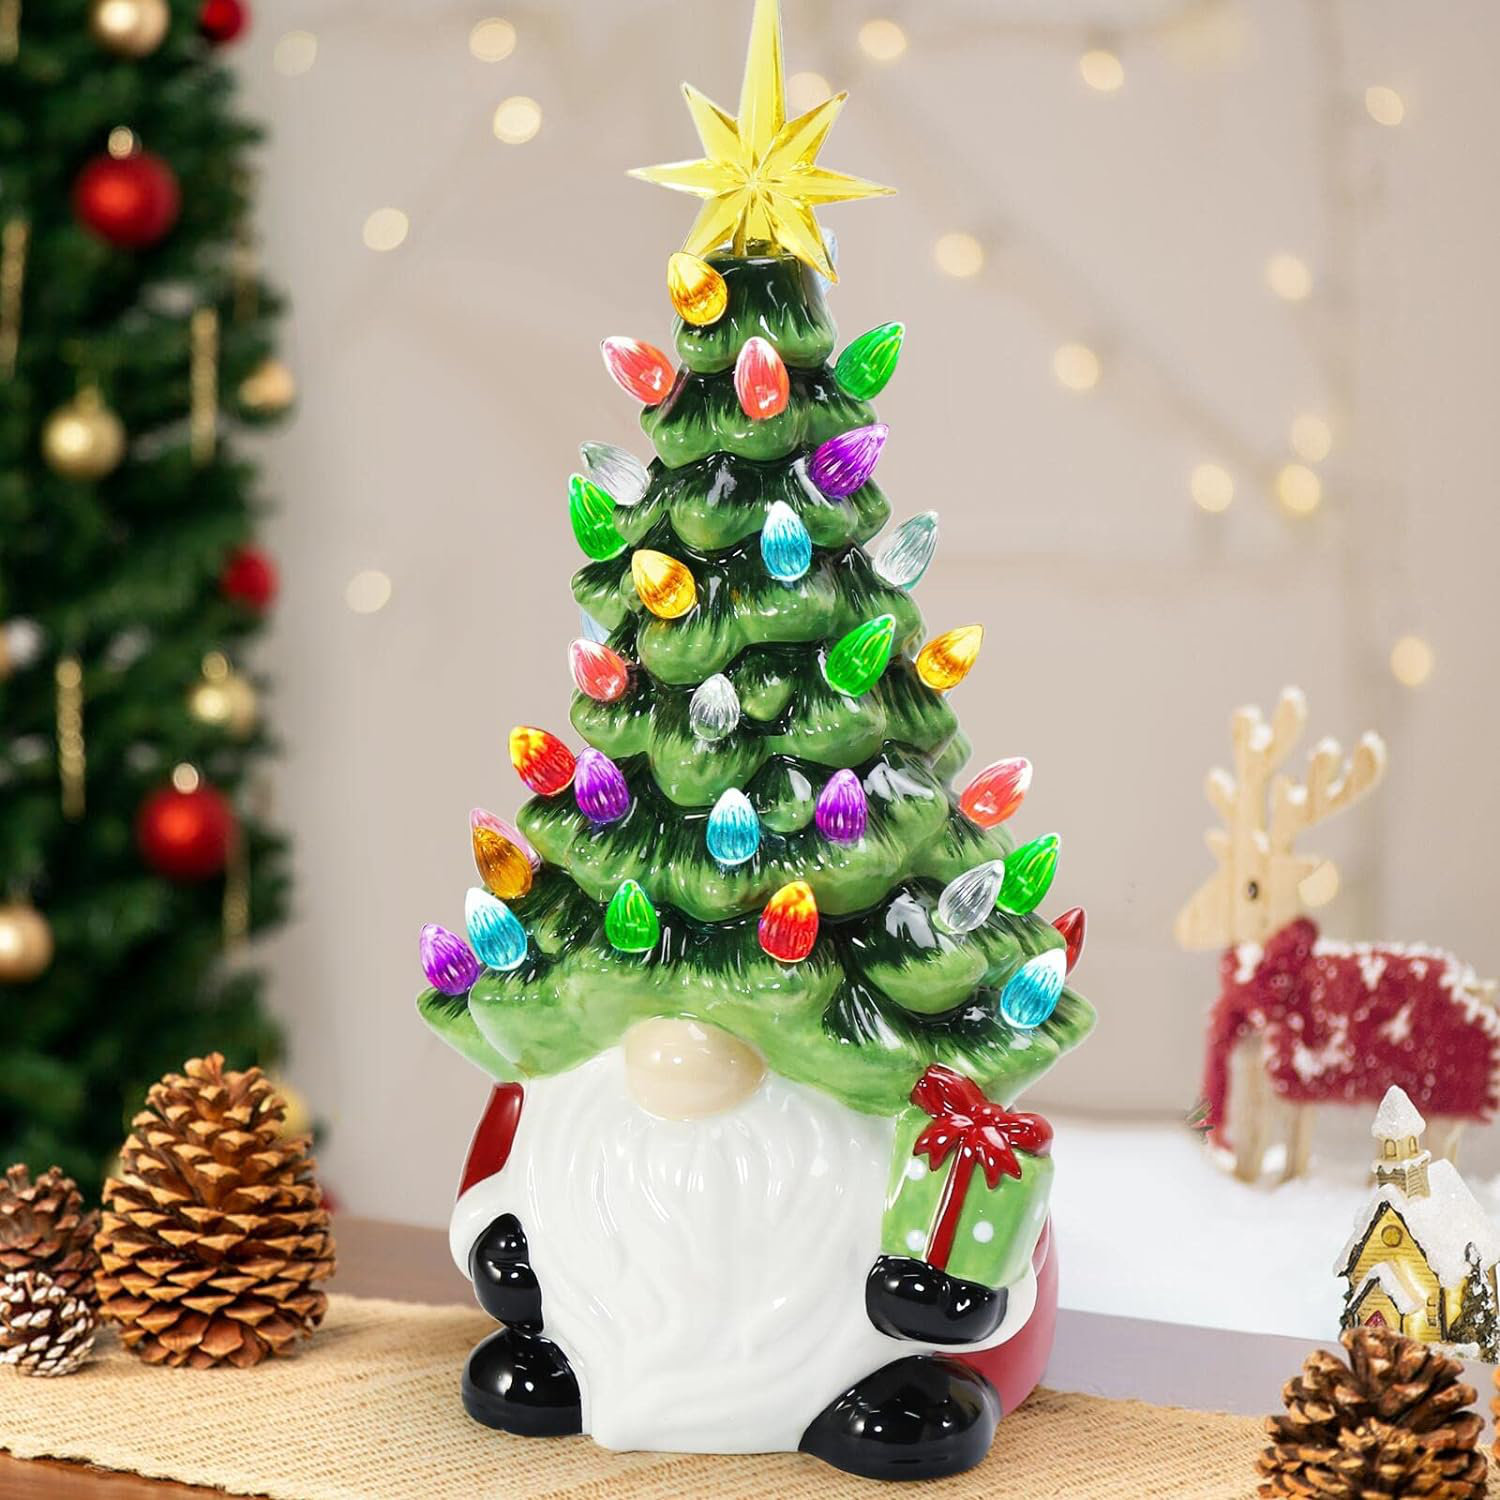 This Tabletop Christmas Tree From  is a Festive Desk Accessory